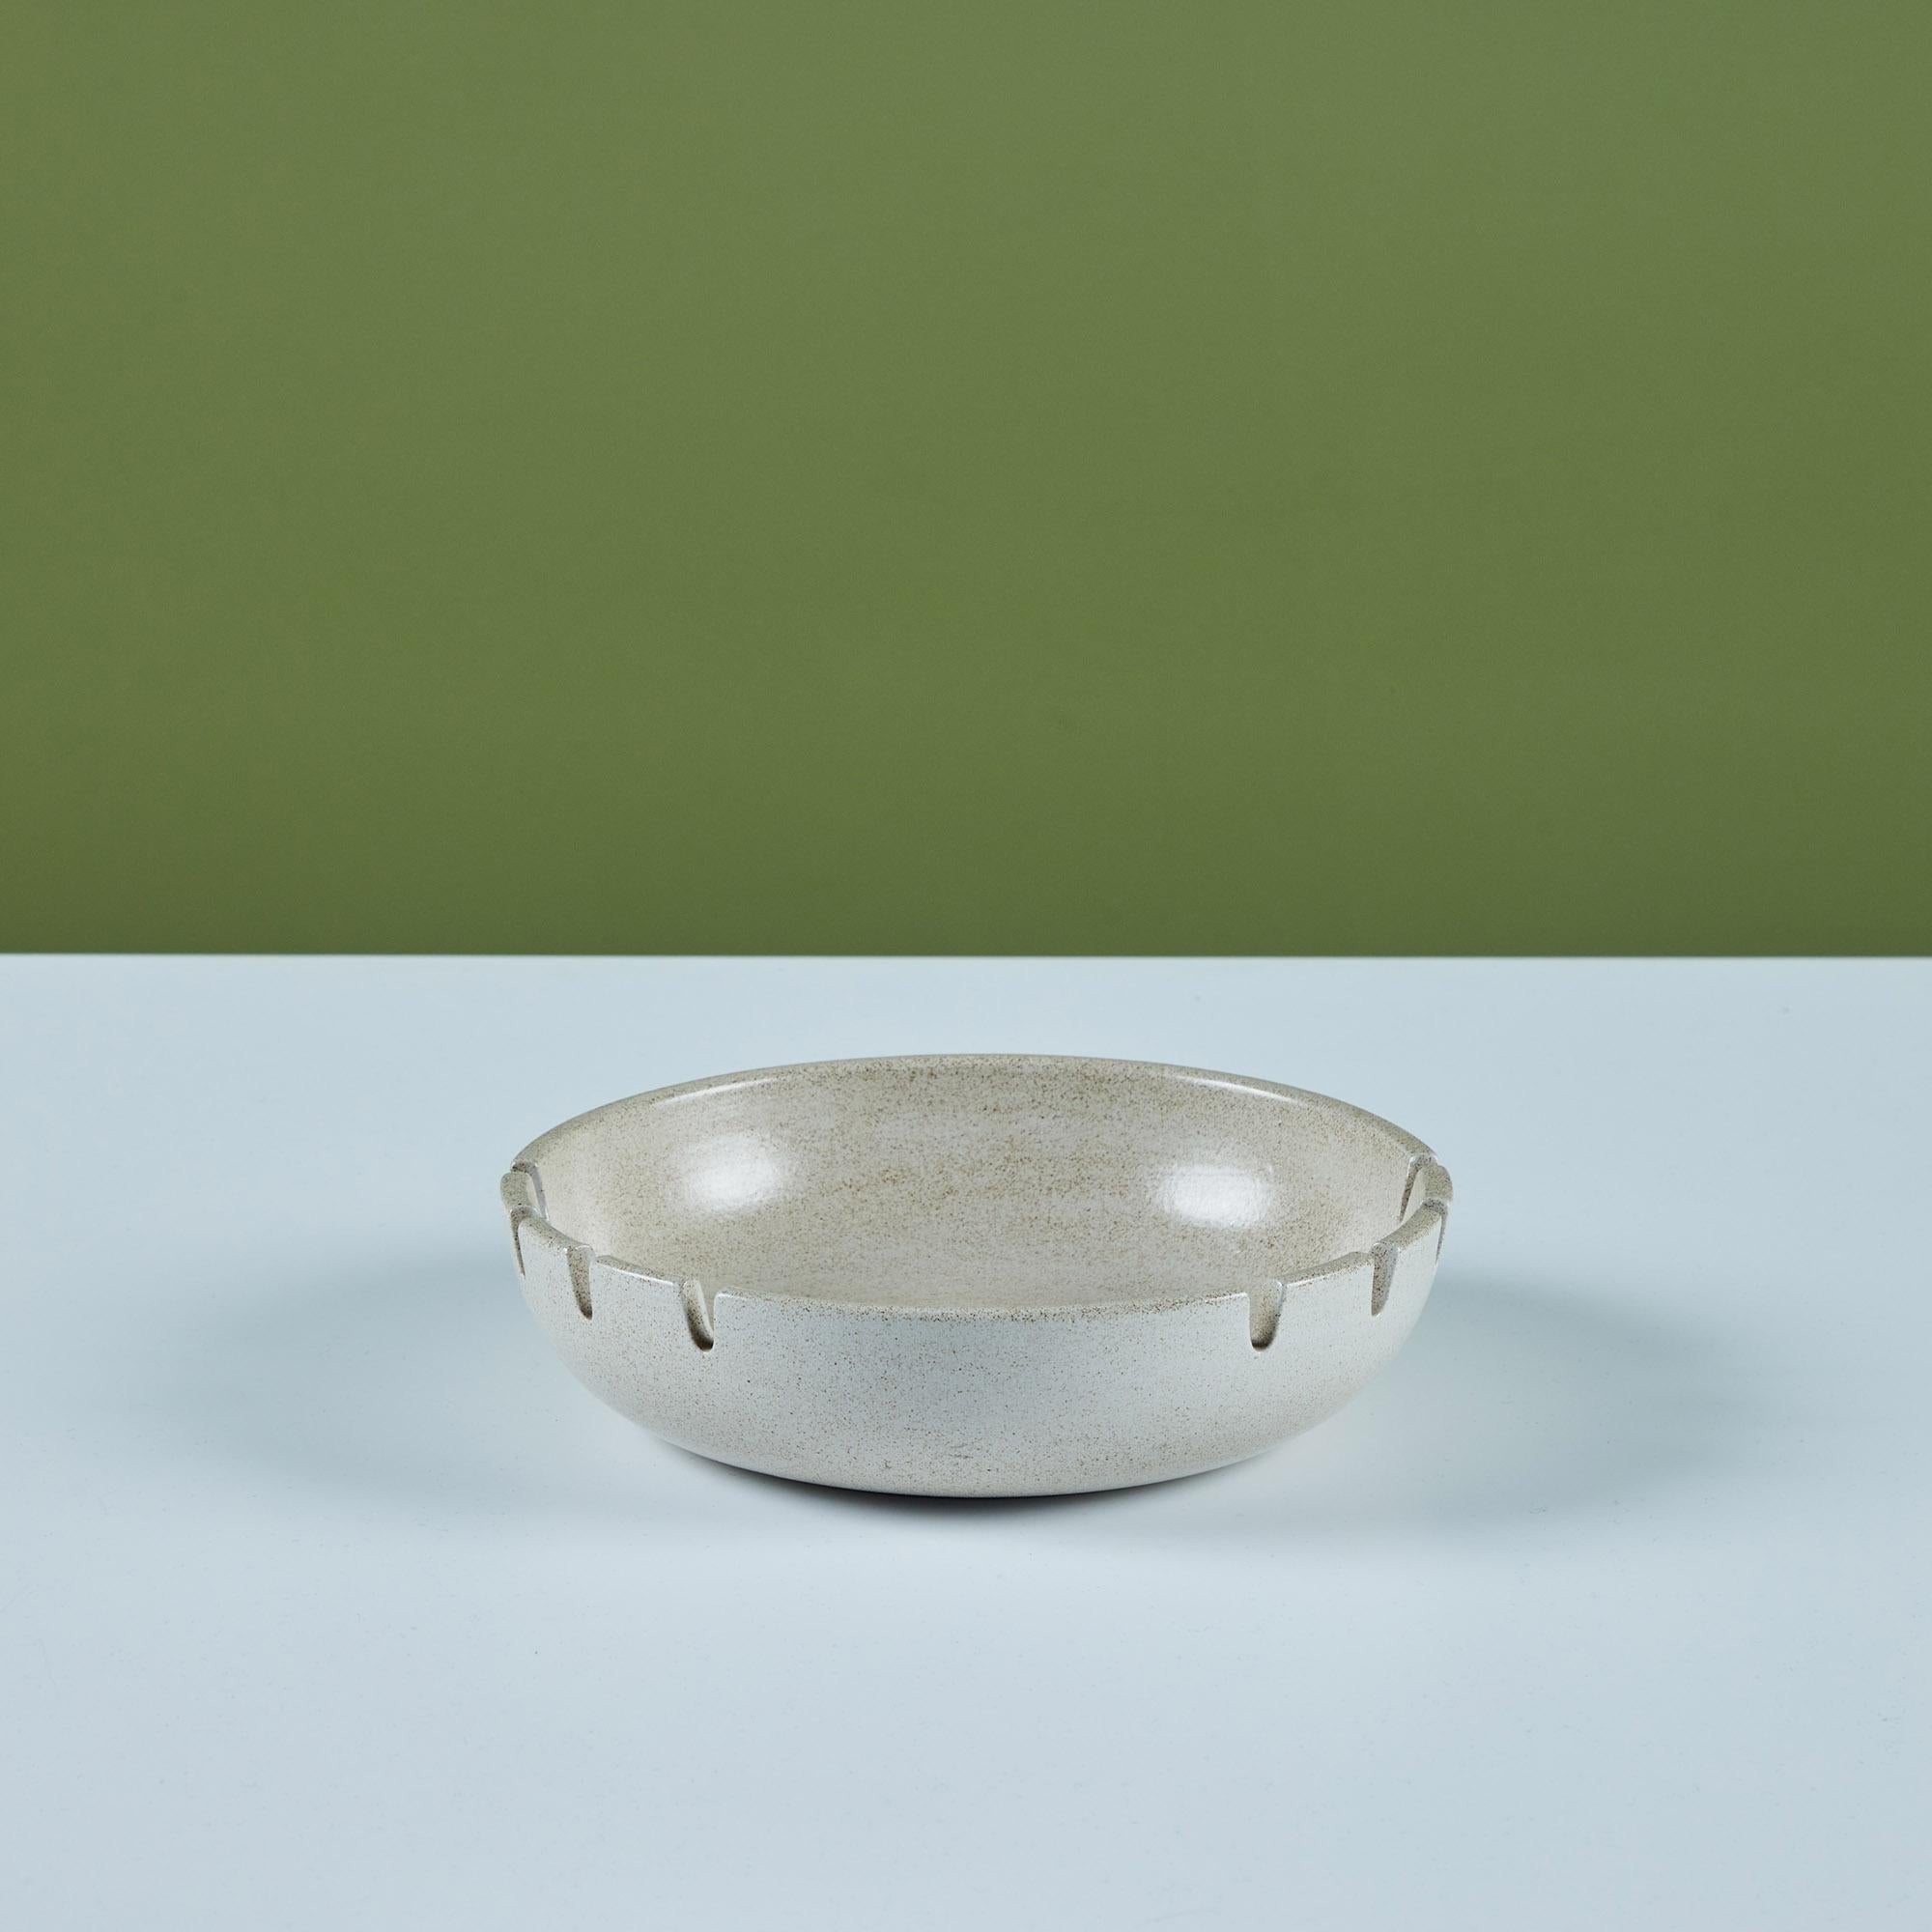 Glazed ceramic ashtray by Heath Ceramics, c.1960s, USA. The ashtray features an all over cream speckle glaze. There are eight holding slots for cigarettes. Can also be used as a decorative catchall or soap dish.
Inscribed on the underside, “Heath -